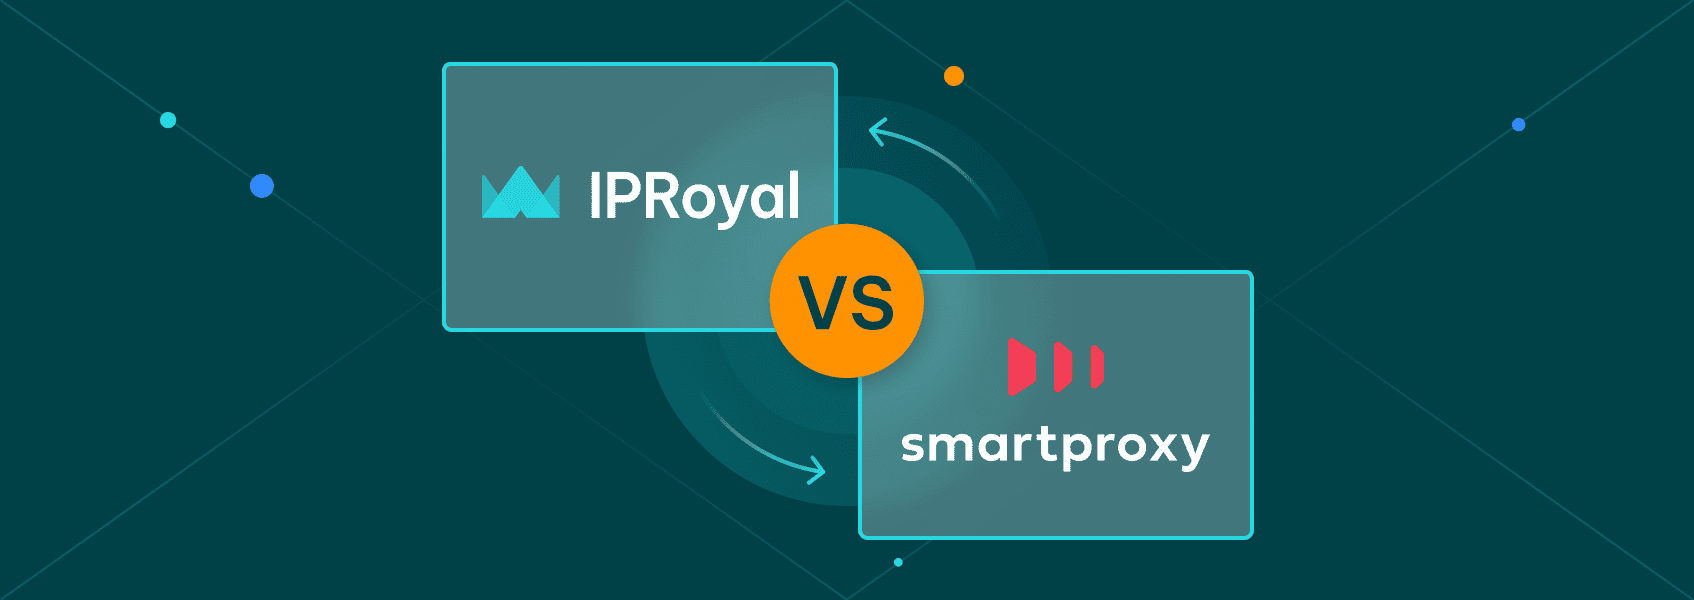 IPRoyal vs. Smartproxy – An In-depth Feature Comparison